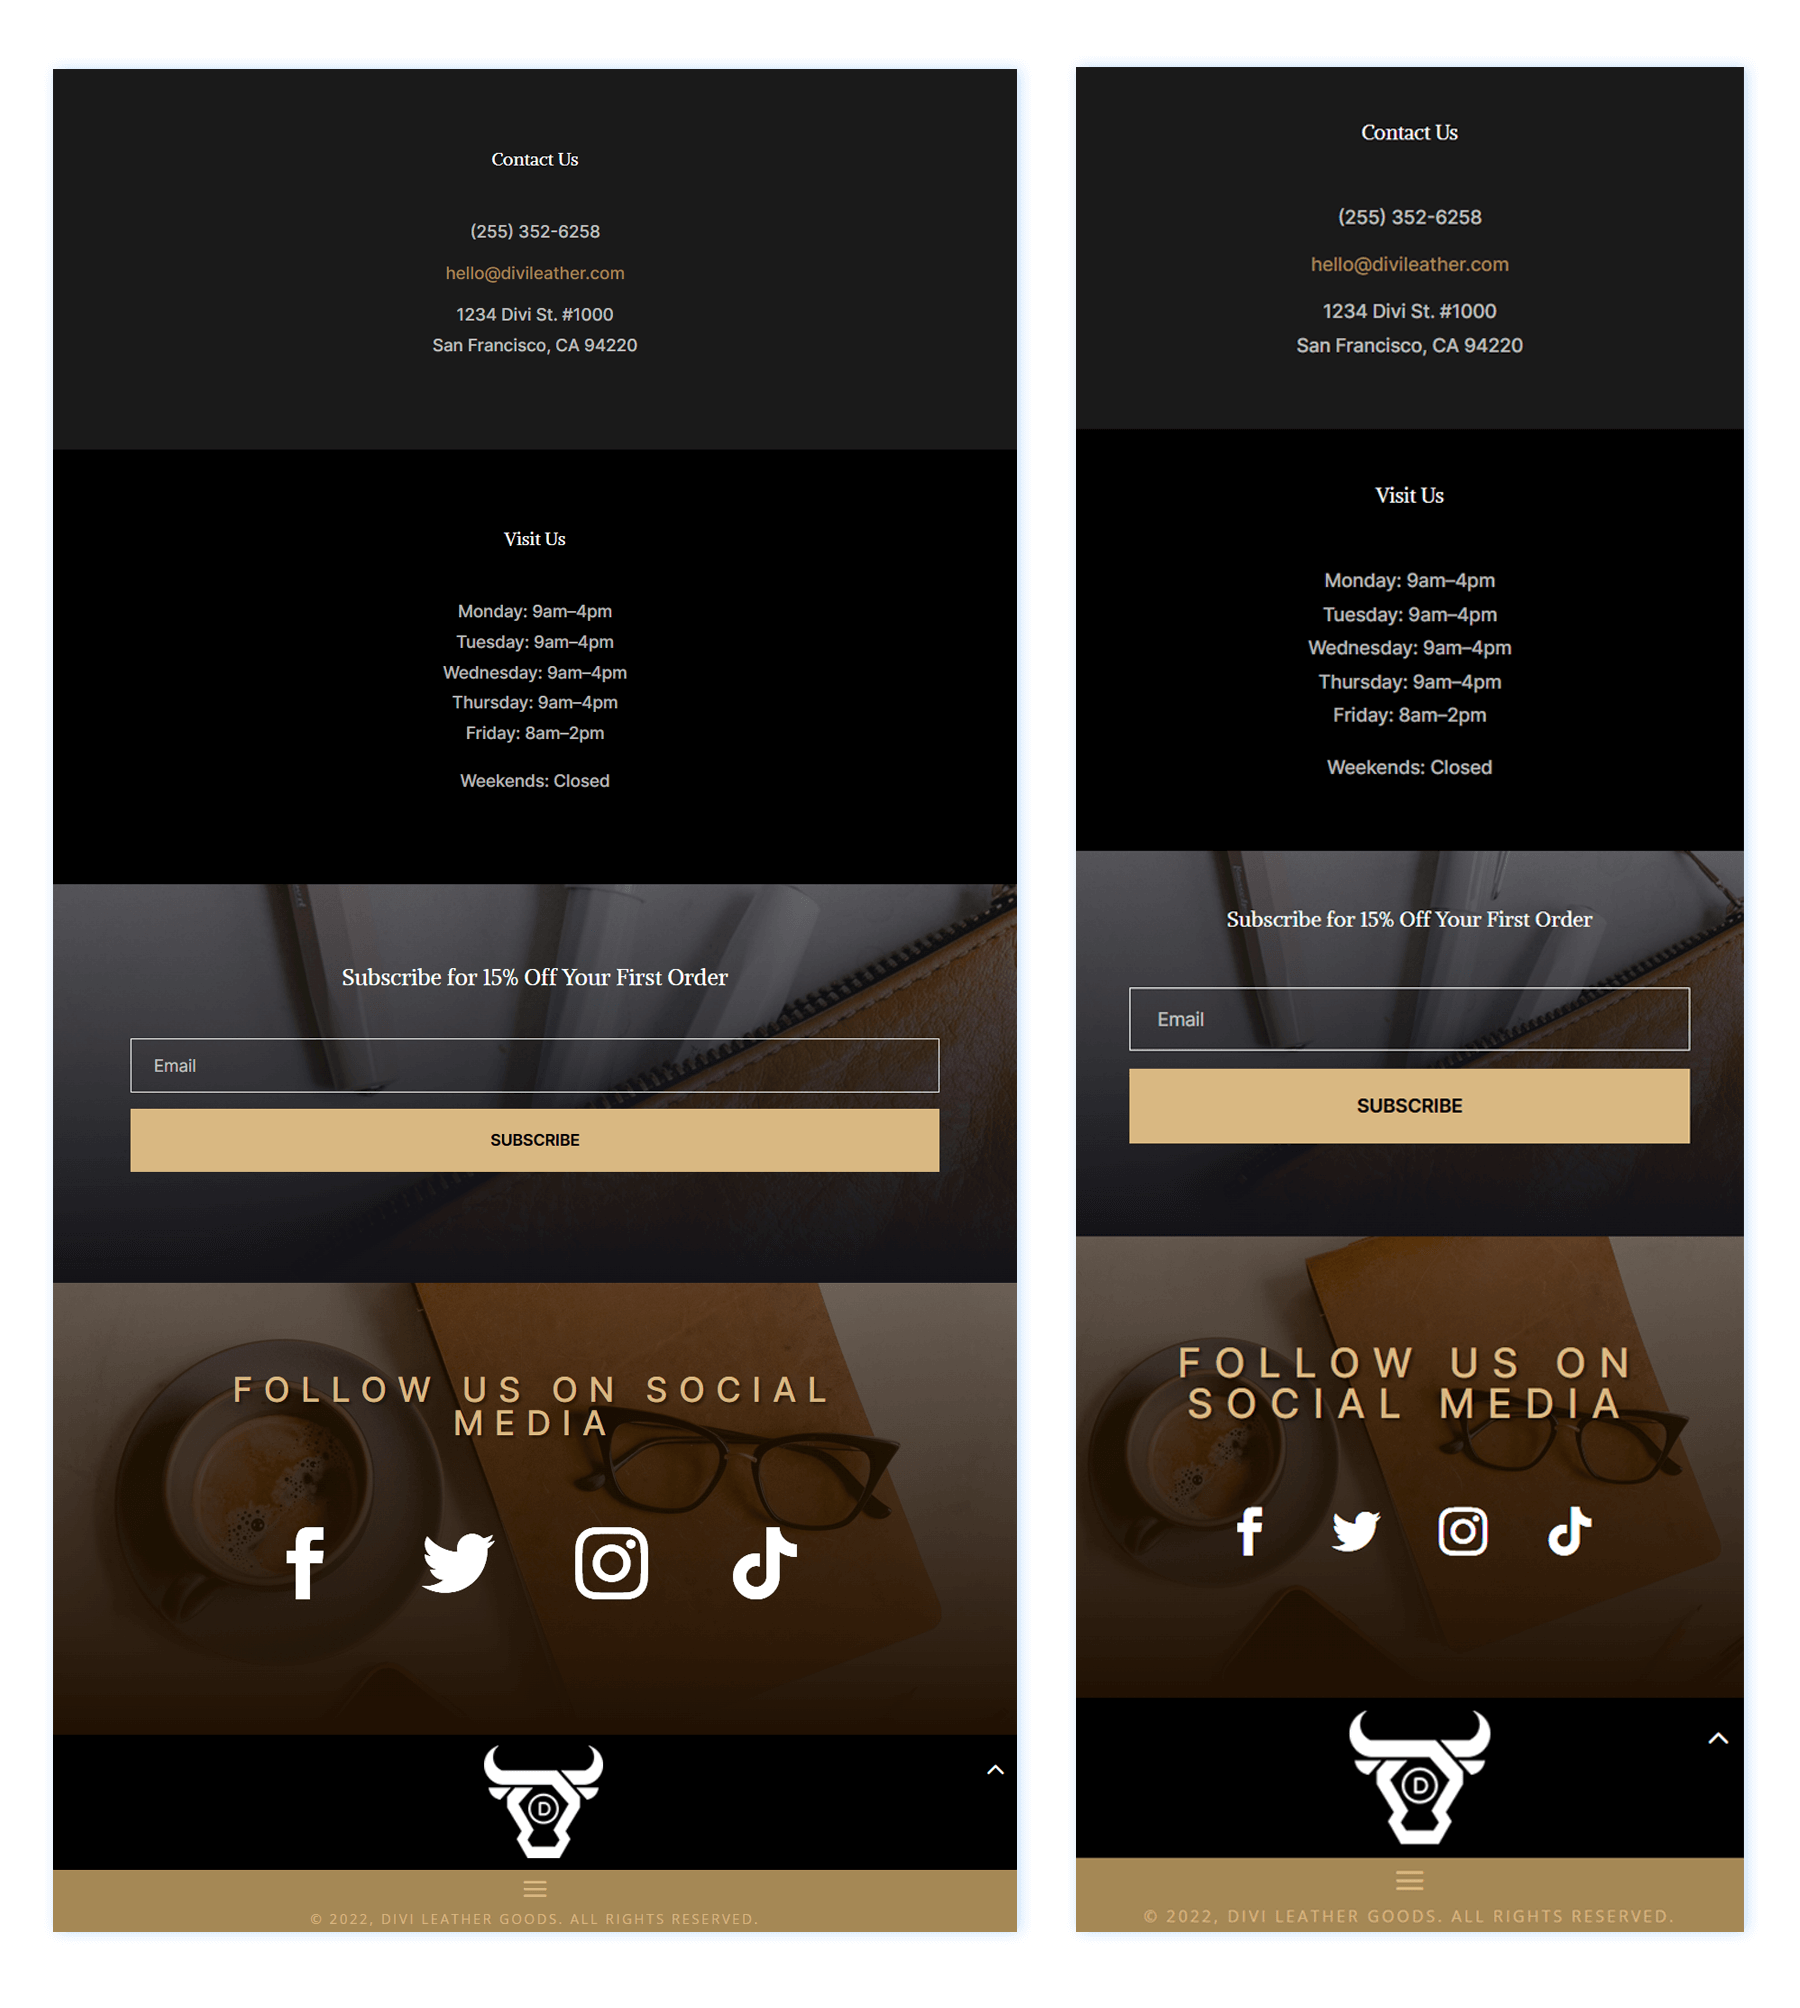 Footer design for Divi Leather Goods Layout Pack, tablet and mobile view